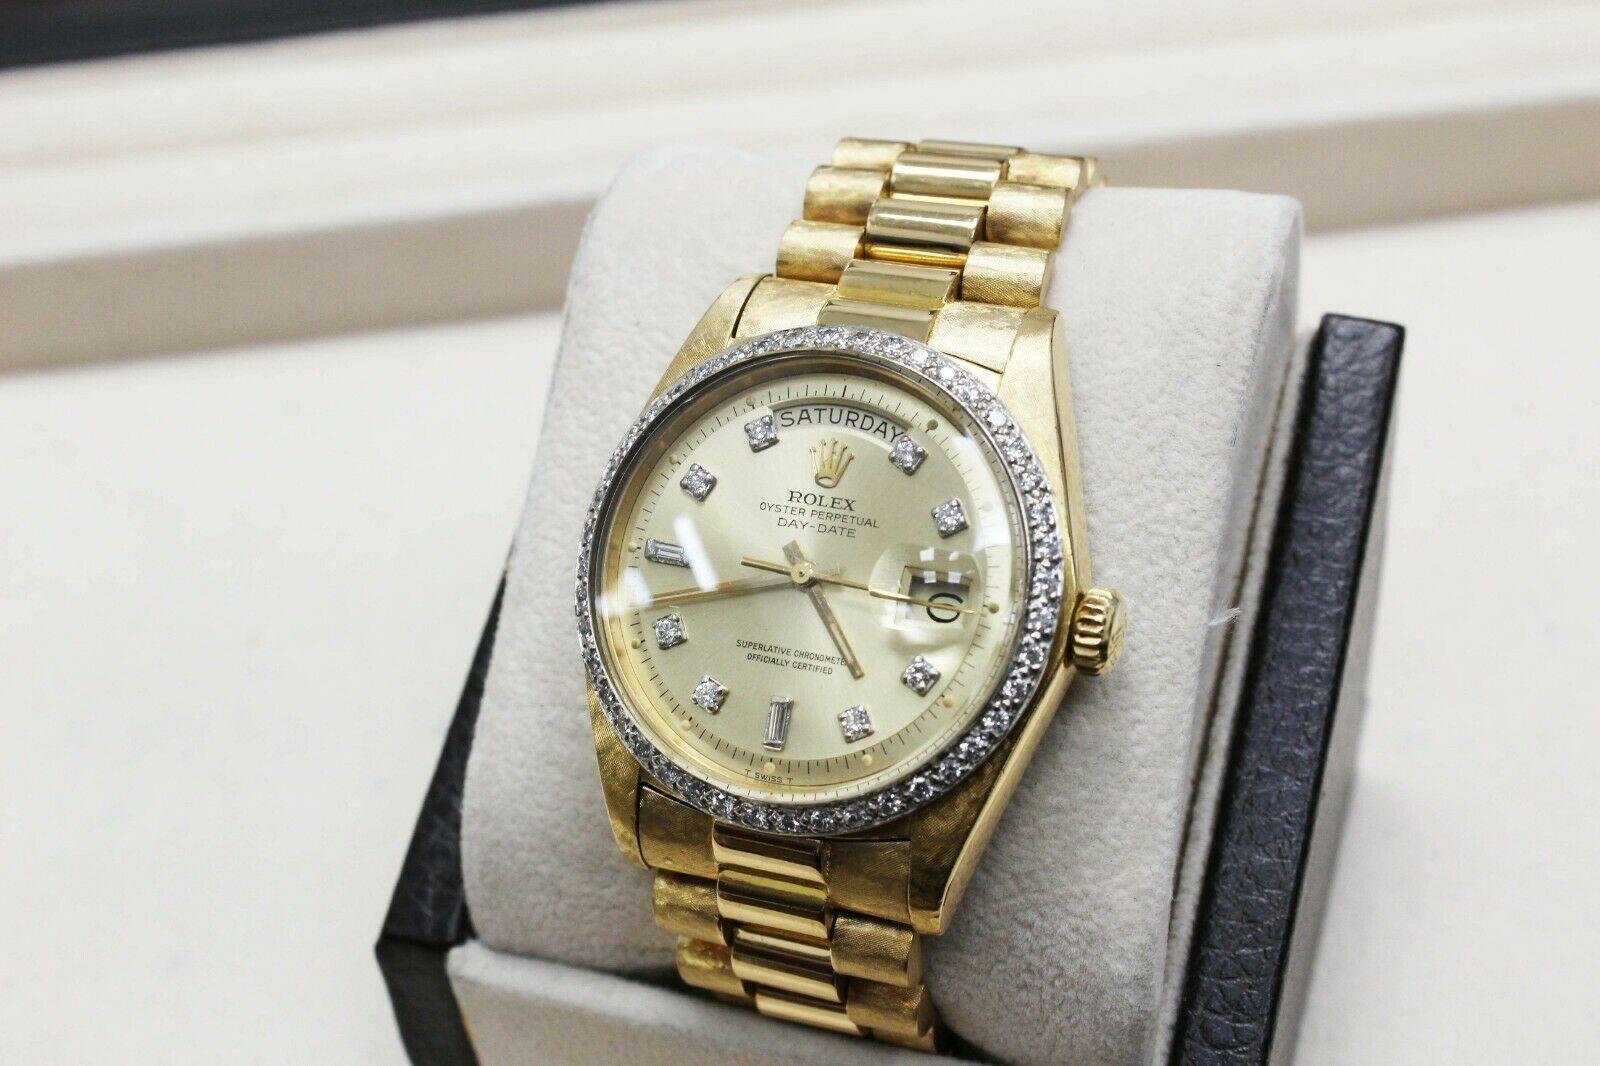 Style Number: 1803
 
Serial: 3381***
 
Model: President Day Date
 
Case Material: 18K Yellow Gold
 
Band: 18K Yellow Gold
 
Bezel: Custom Diamond Bezel 
 
Dial: Custom Diamond Dial
 
Face: Acrylic 
 
Case Size: 36mm
 
Includes: 
-Elegant Watch